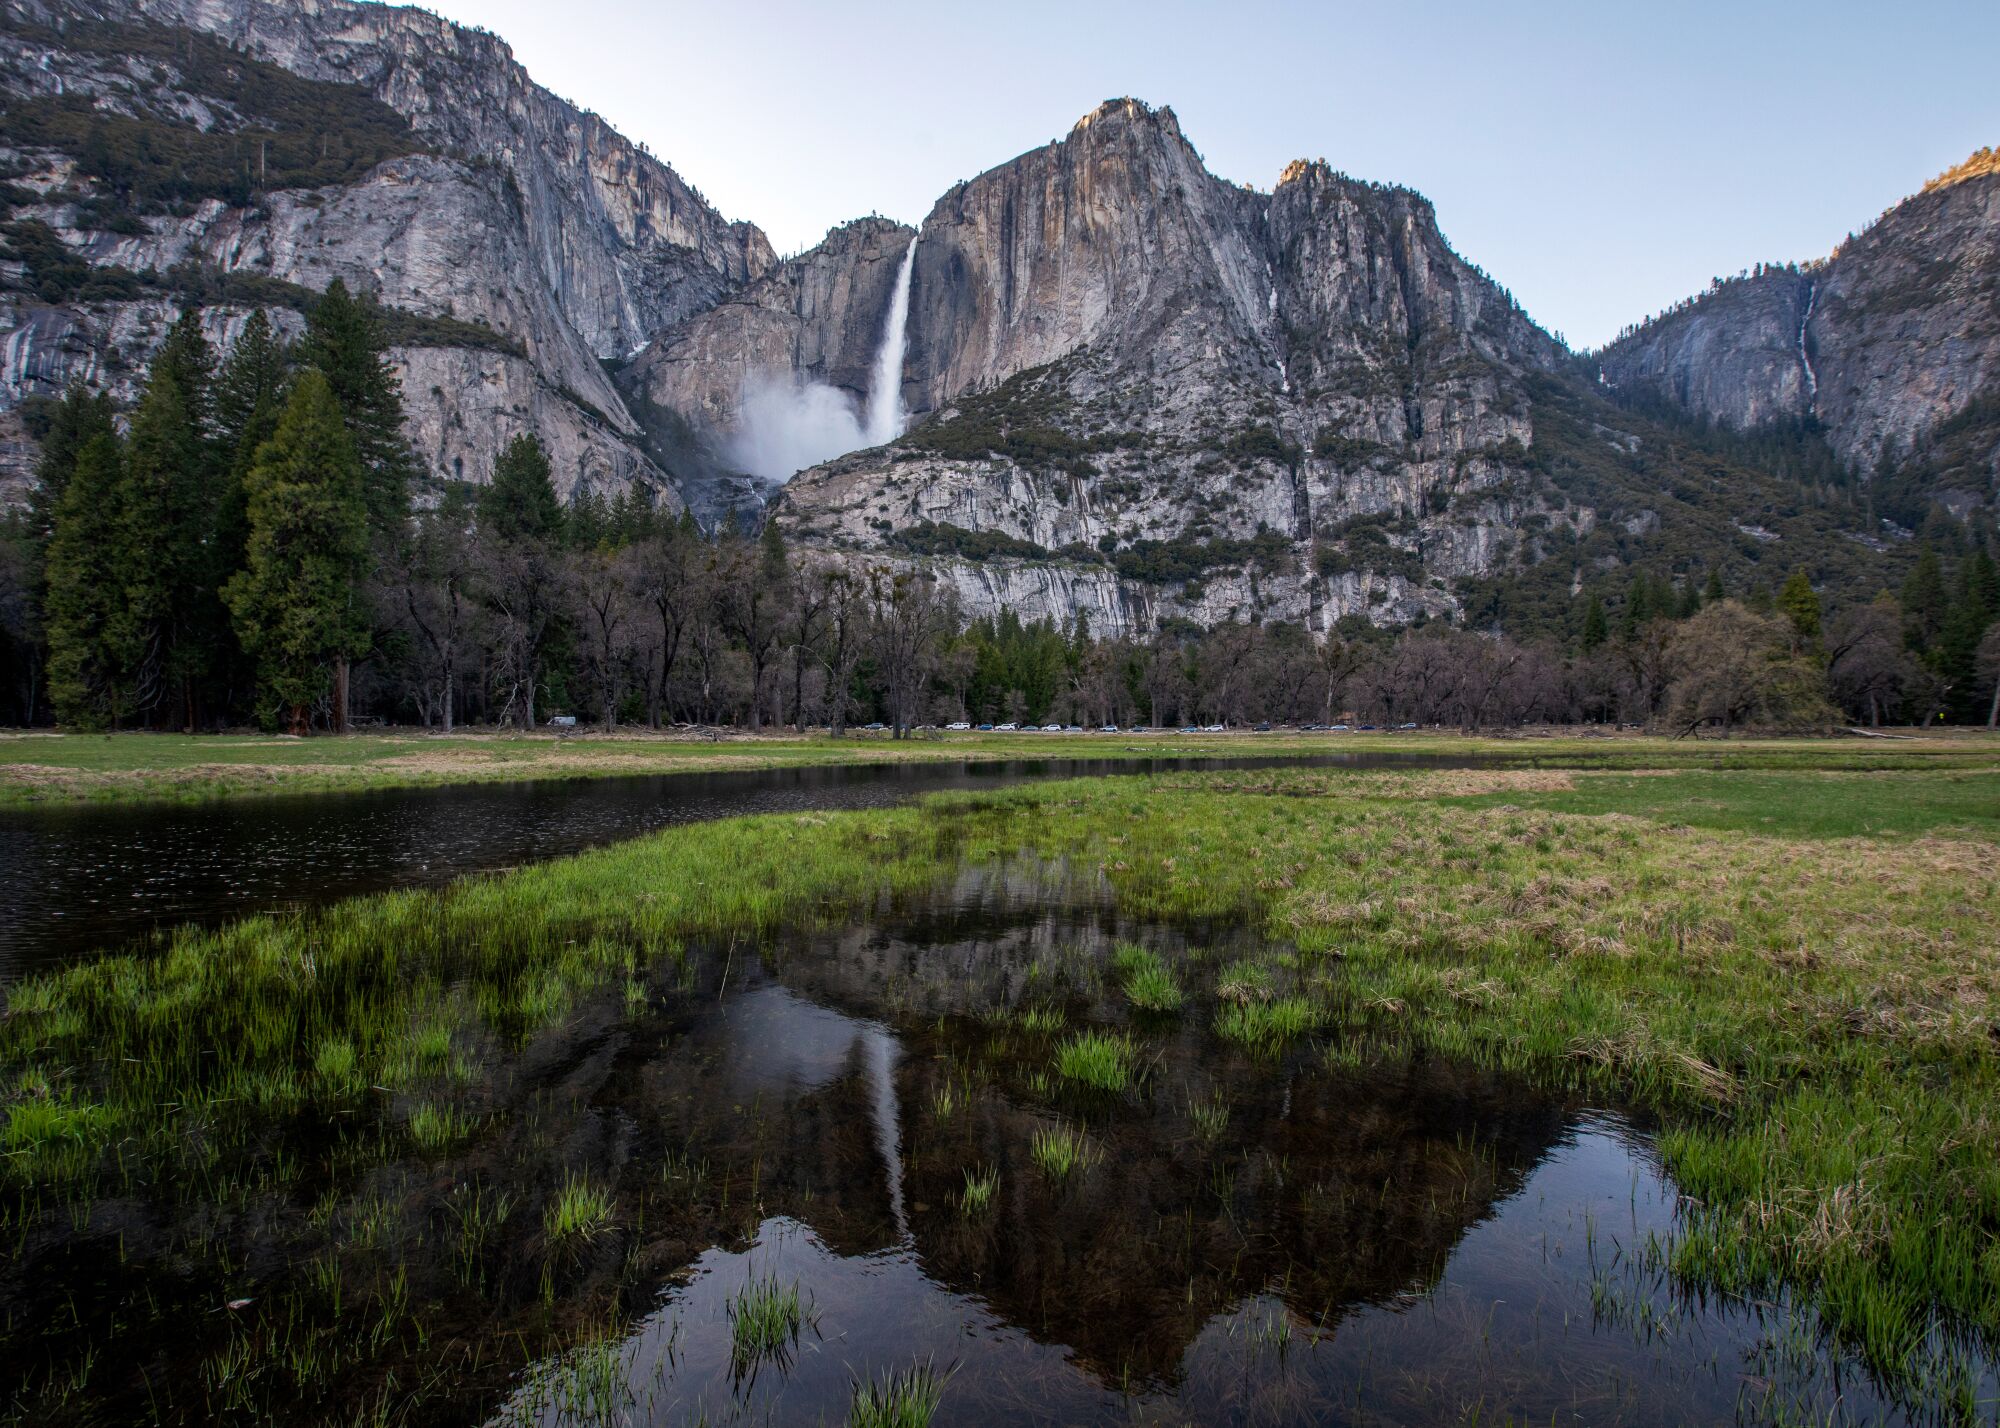 A horizontal frame of a waterfall and its reflection in a puddle  in Yosemite Valley